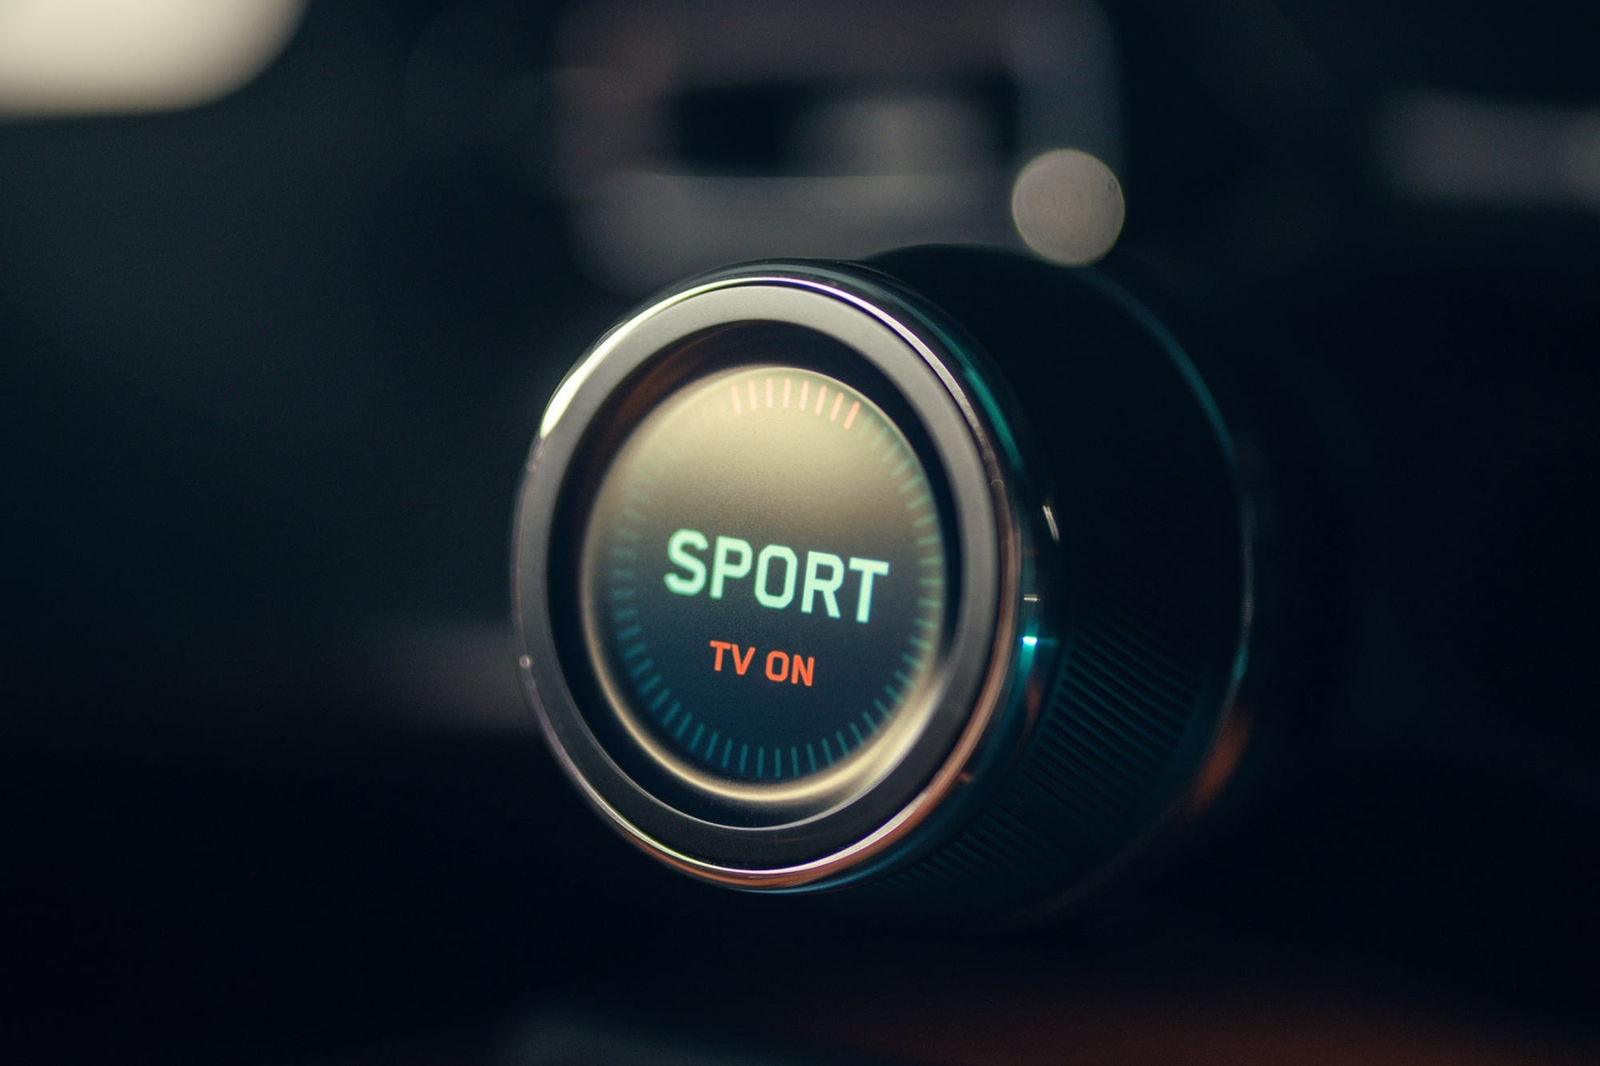 technology, supercars, sports cars, what is track mode in a car?